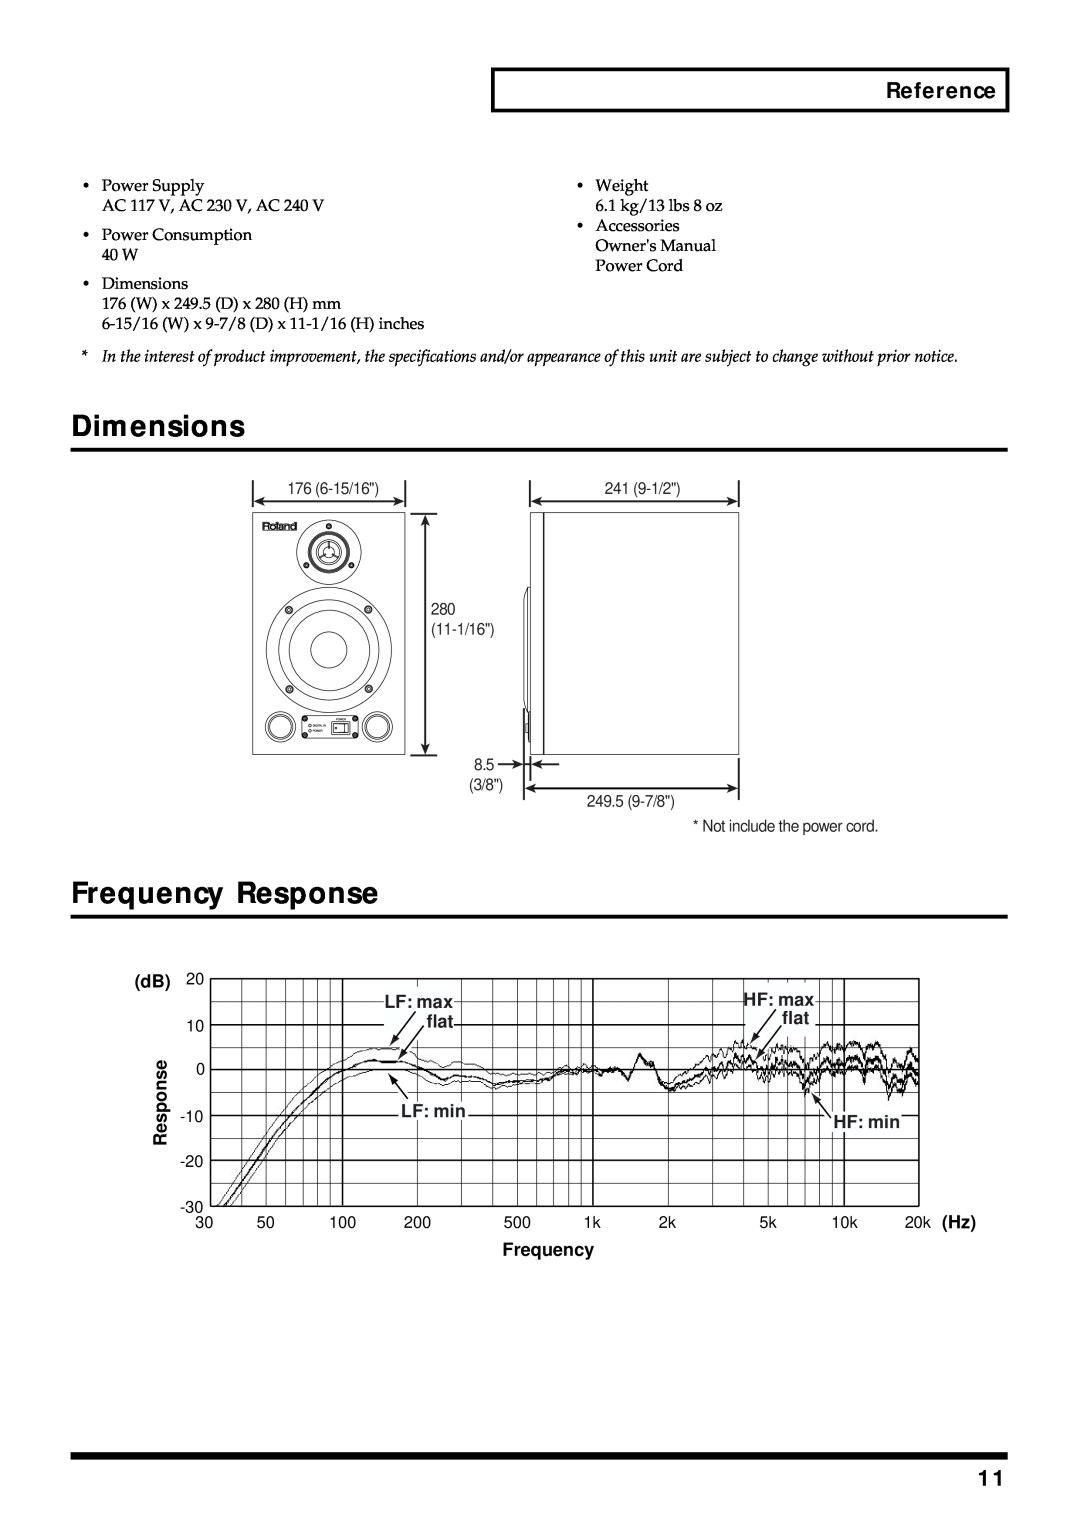 Roland DS-30A owner manual Dimensions, Frequency Response, Reference, HF max, flat, LF min, HF min, 176 6-15/16, LF max 